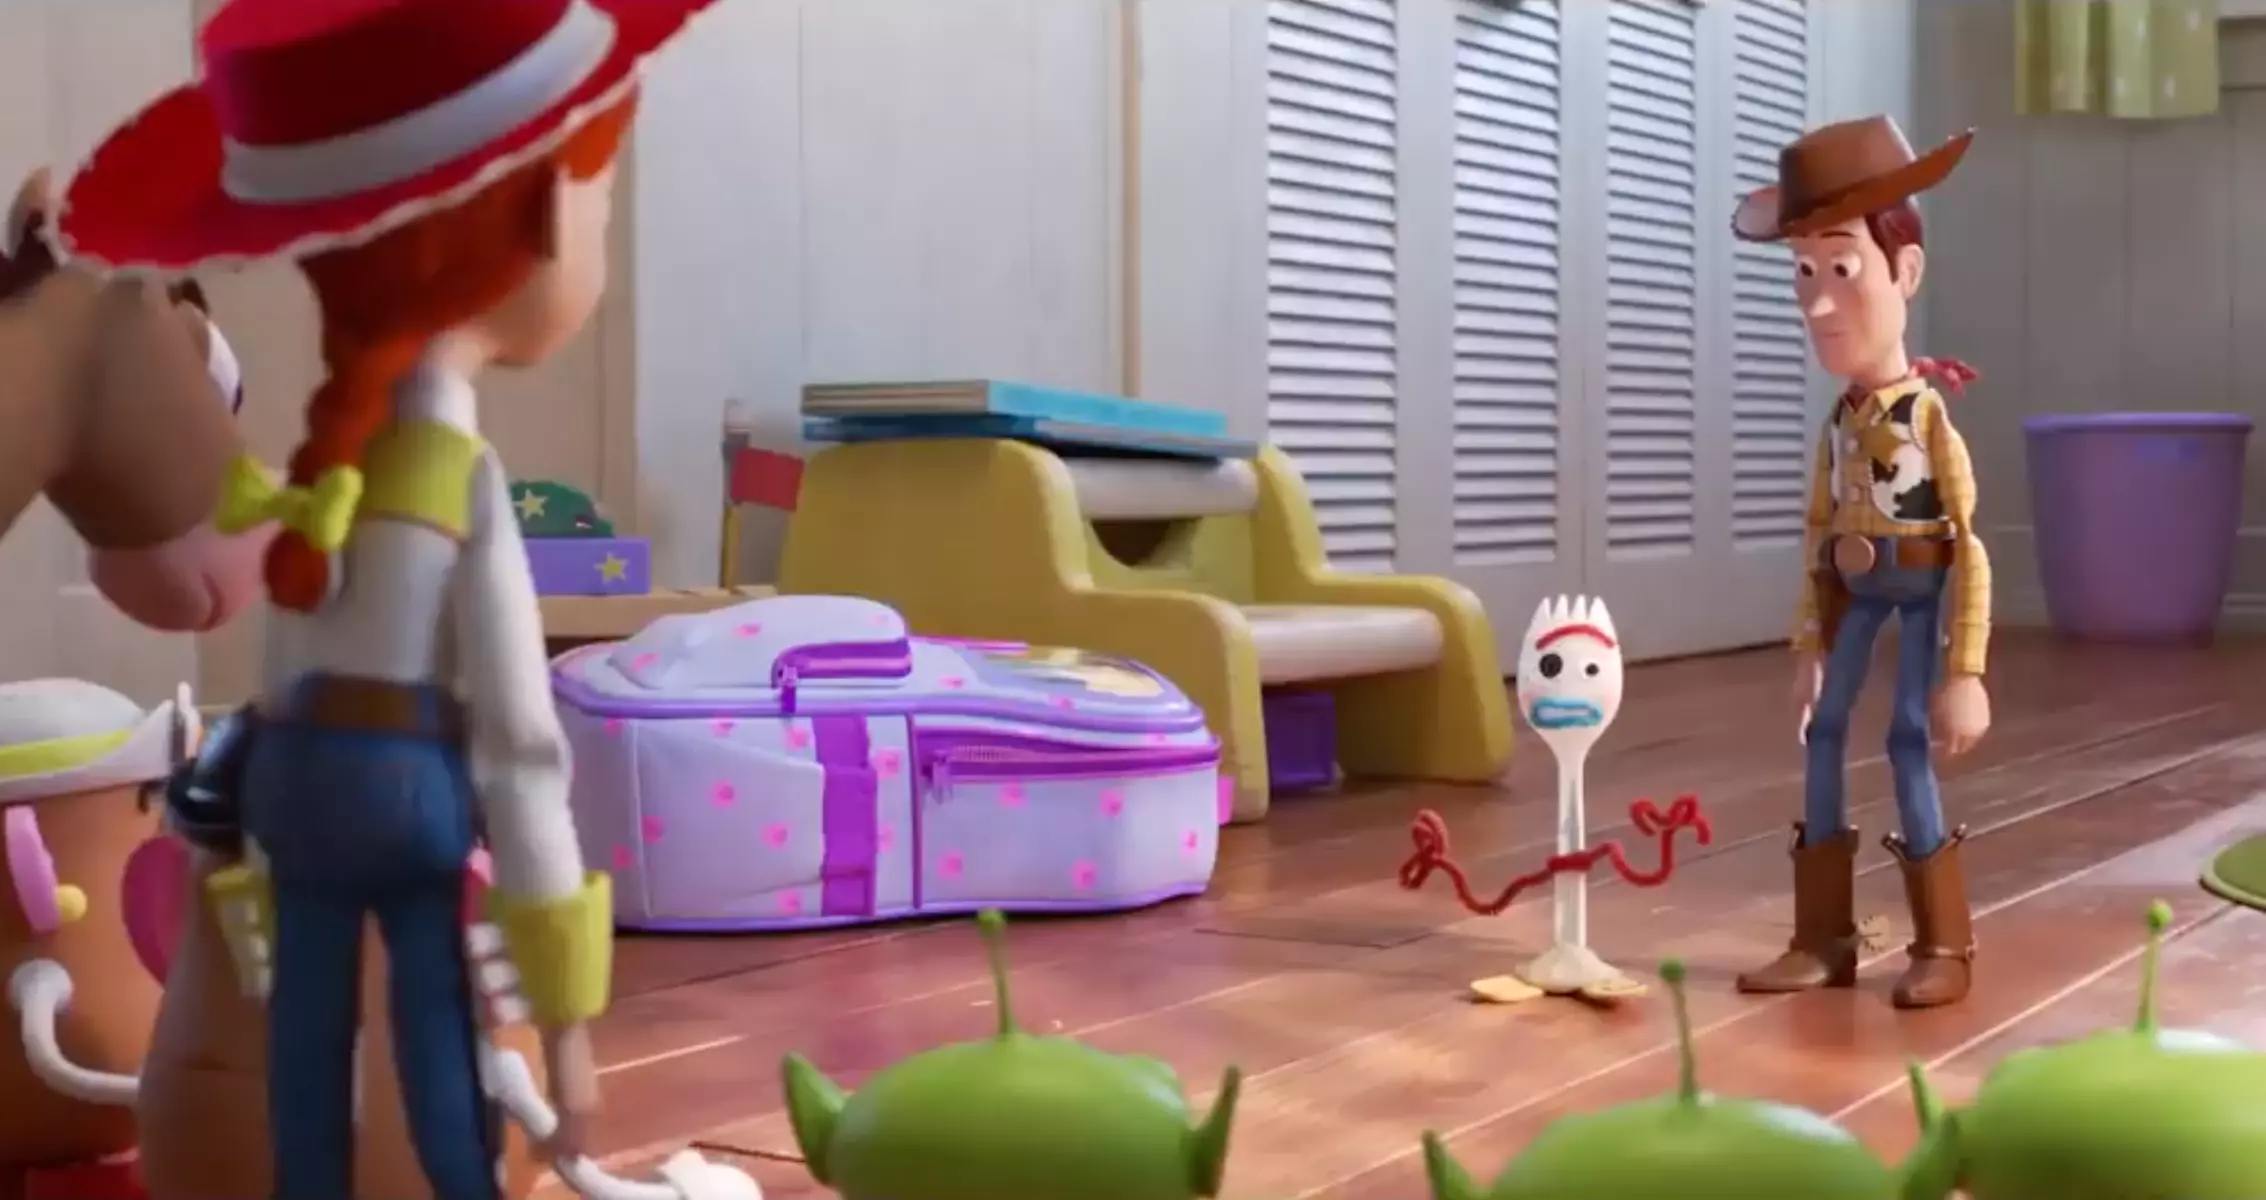 How to make Forky from Toy Story 4, and why you probably shouldn't.